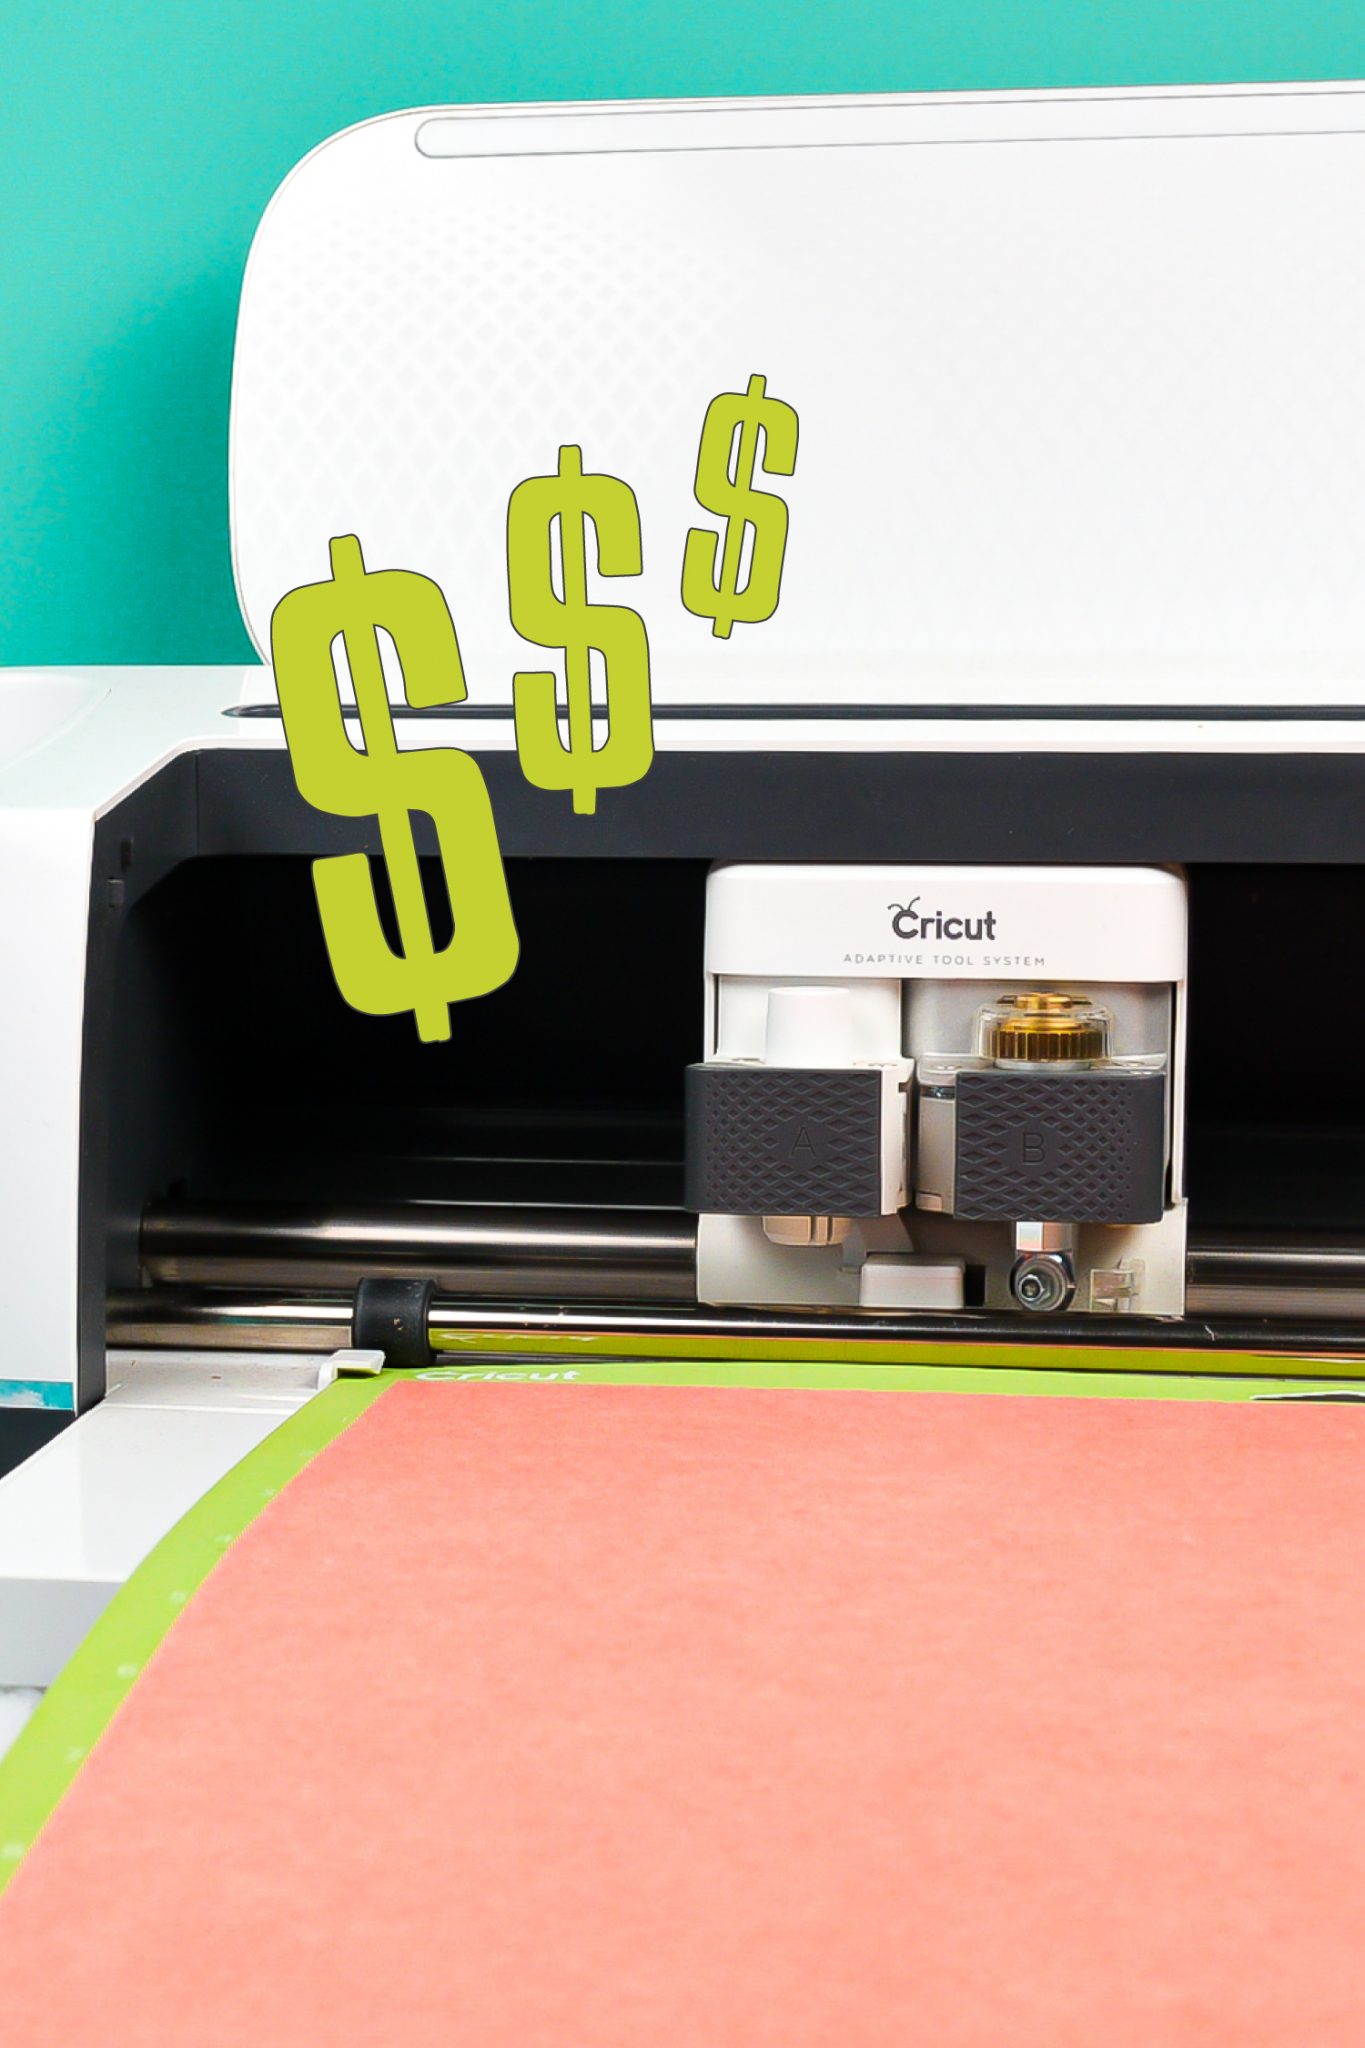 Upgrade your crafting/DIY kit with up to $200 off Cricut gear: Tool sets,  cutting machines, more